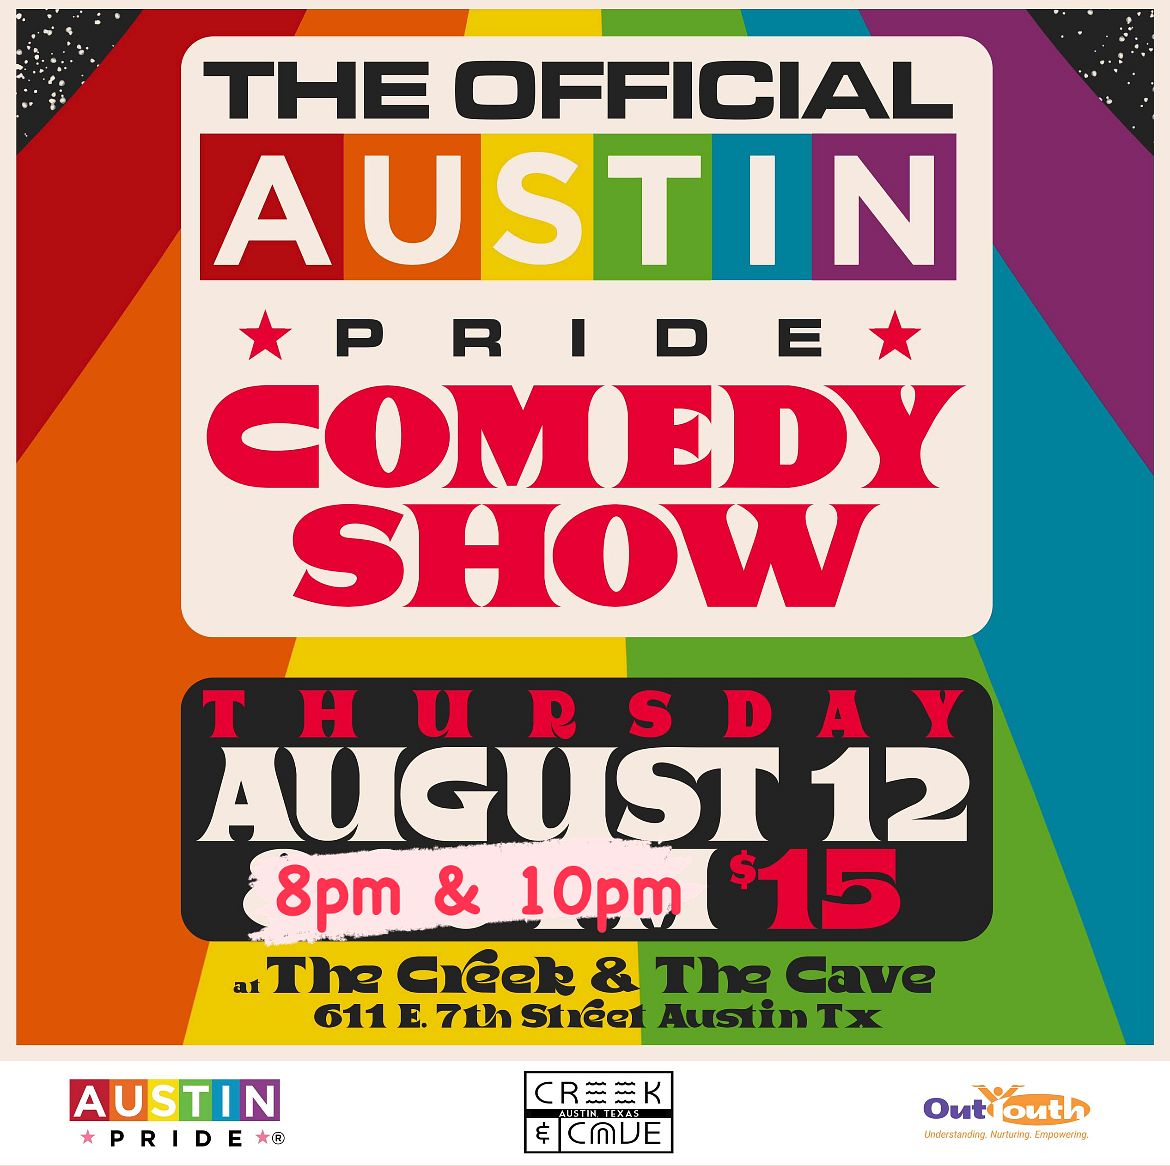 The Official Austin Pride Comedy Show Tickets at The Creek and The Cave